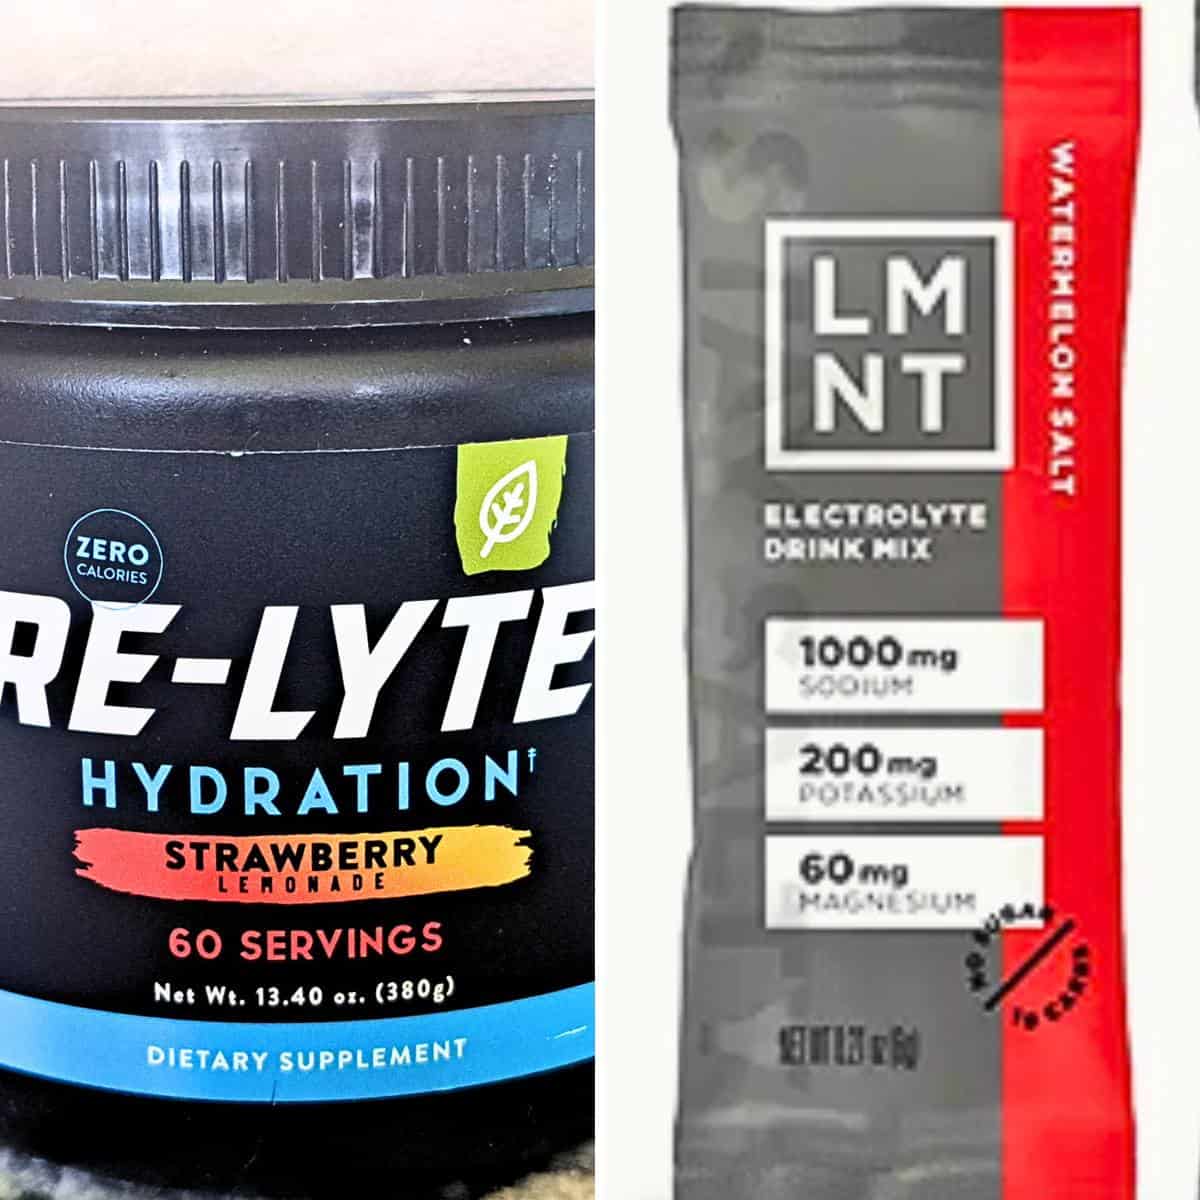 Relyte Hydration VS LMNT Front - Comparing Electrolyte Powders: Relyte vs LMNT